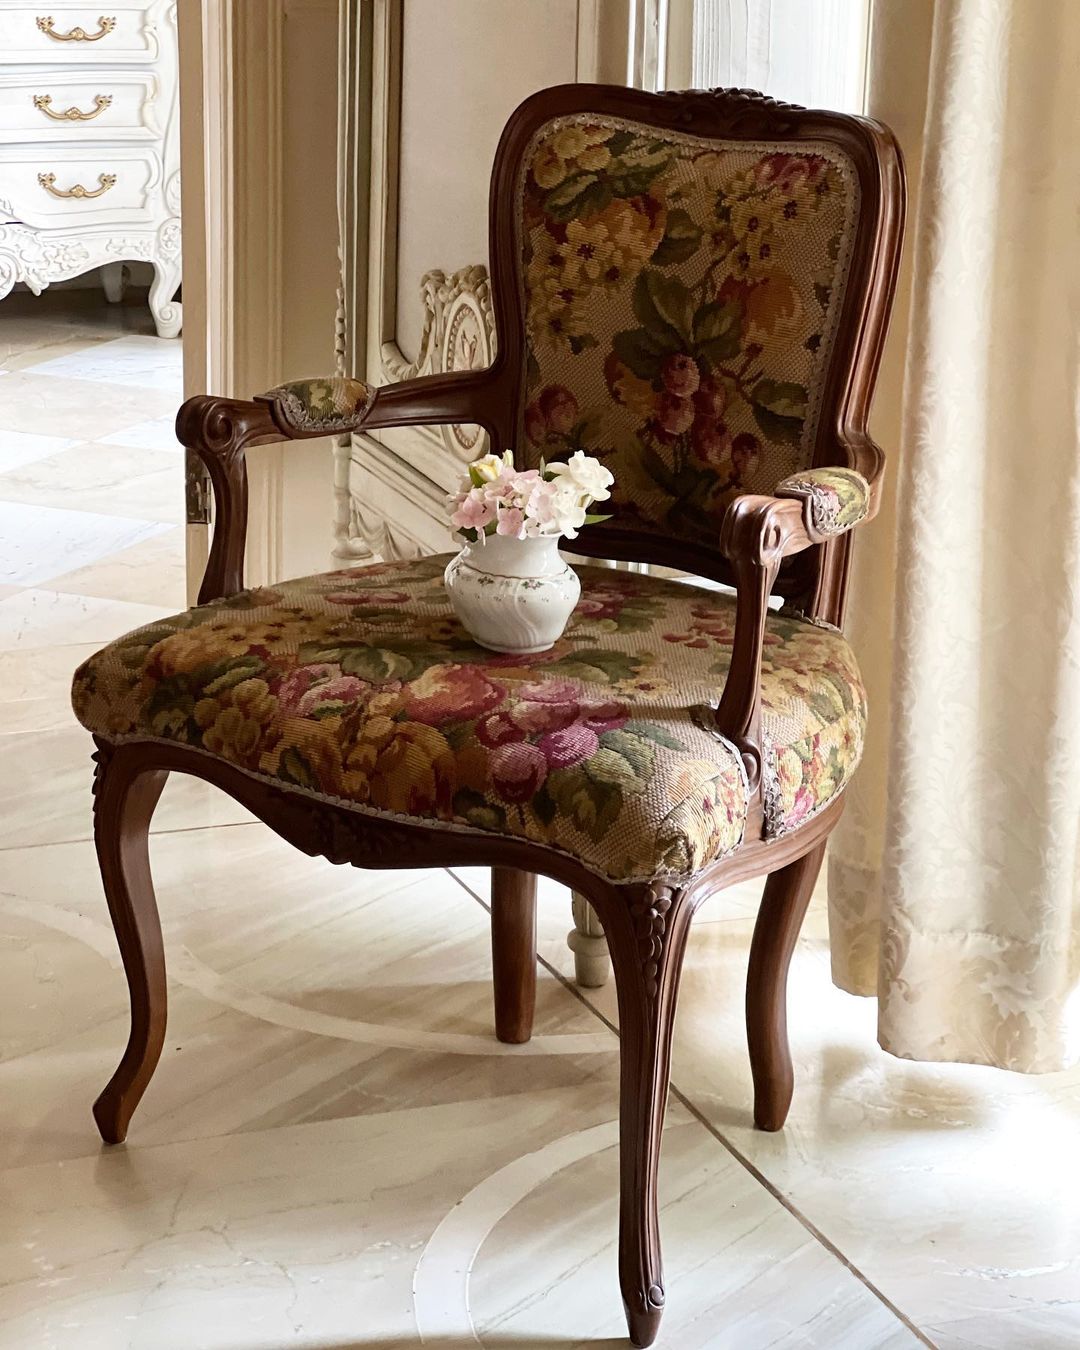 Most classic Louis XV fauteuil